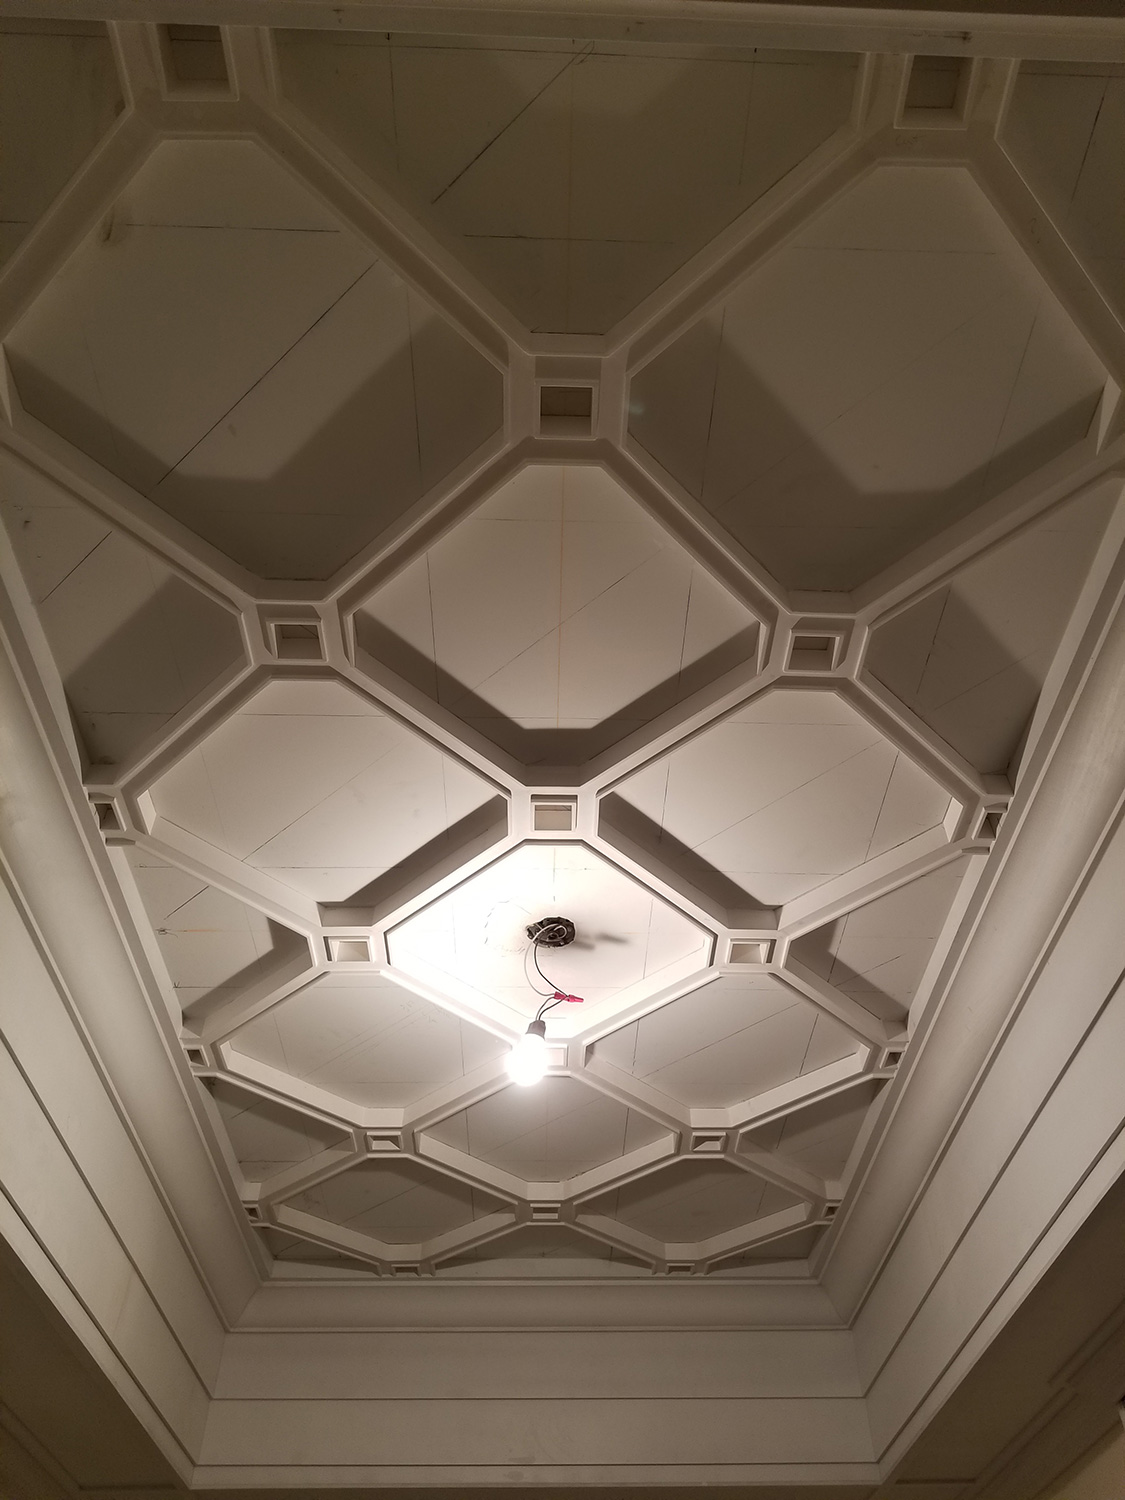 Ceiling System Mouldings